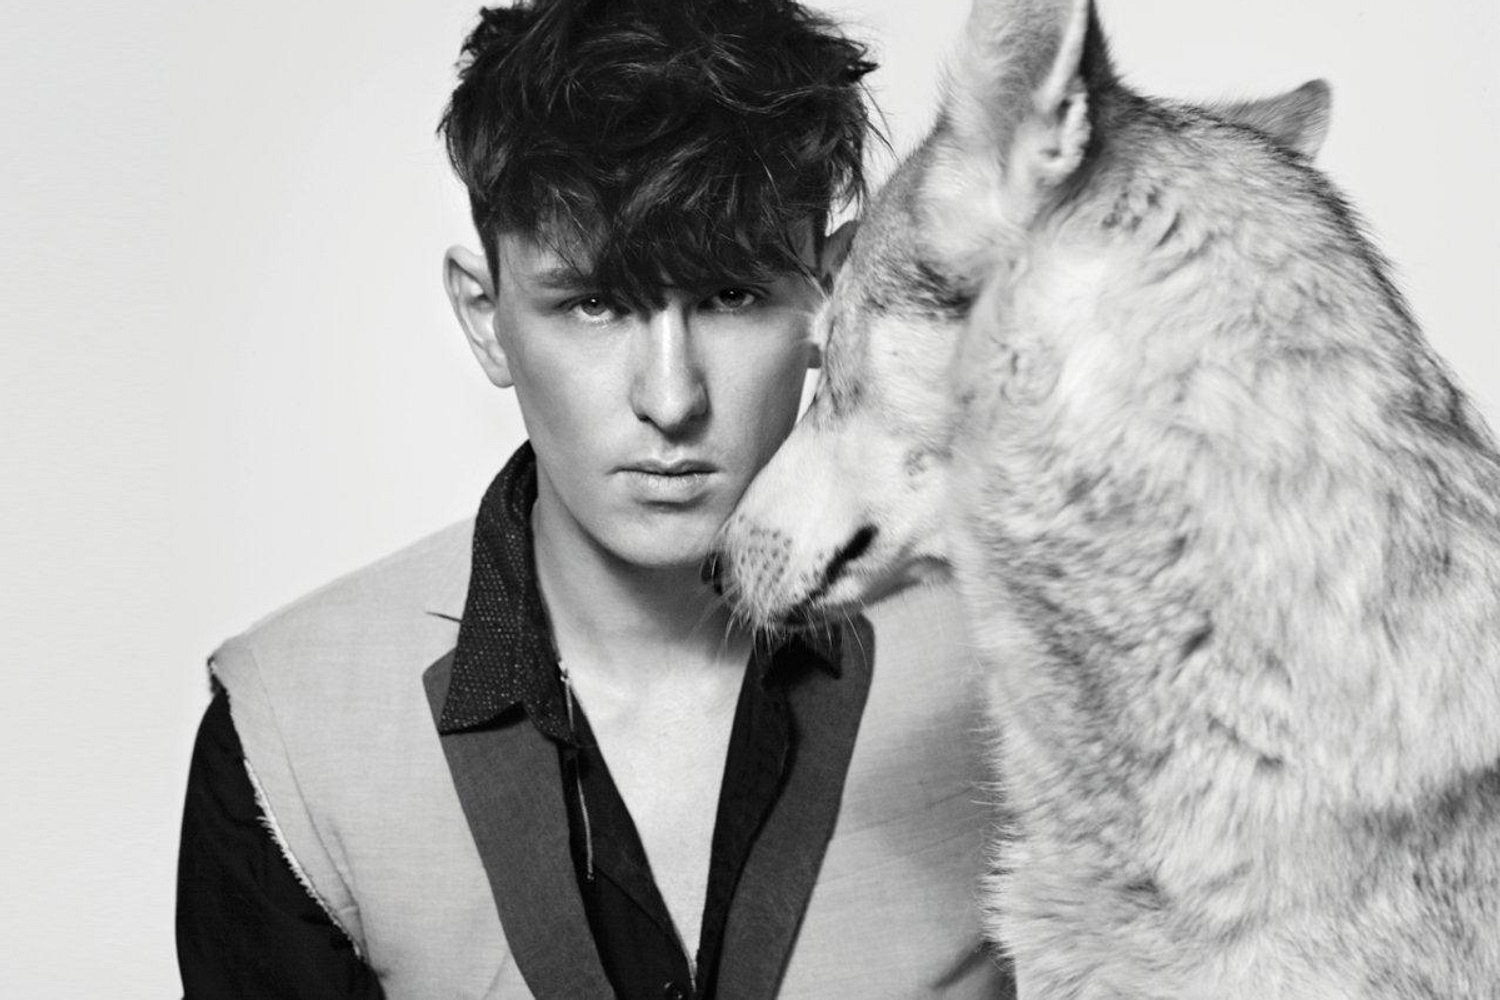 Patrick Wolf returns for May 2016 UK tour